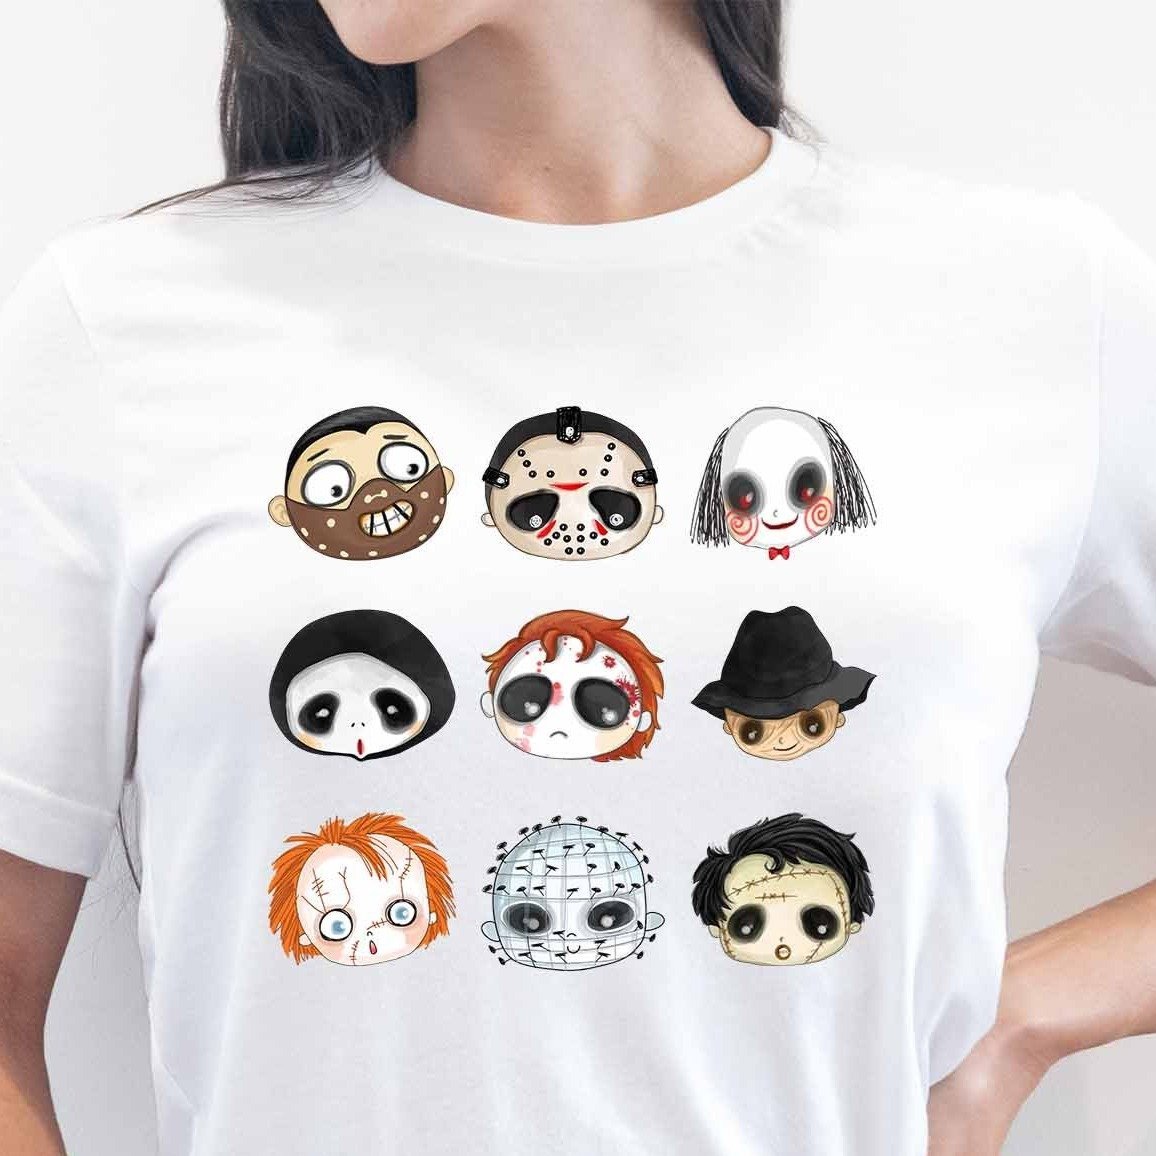 Horror Faces Graphic Tee - My Custom Tee Party